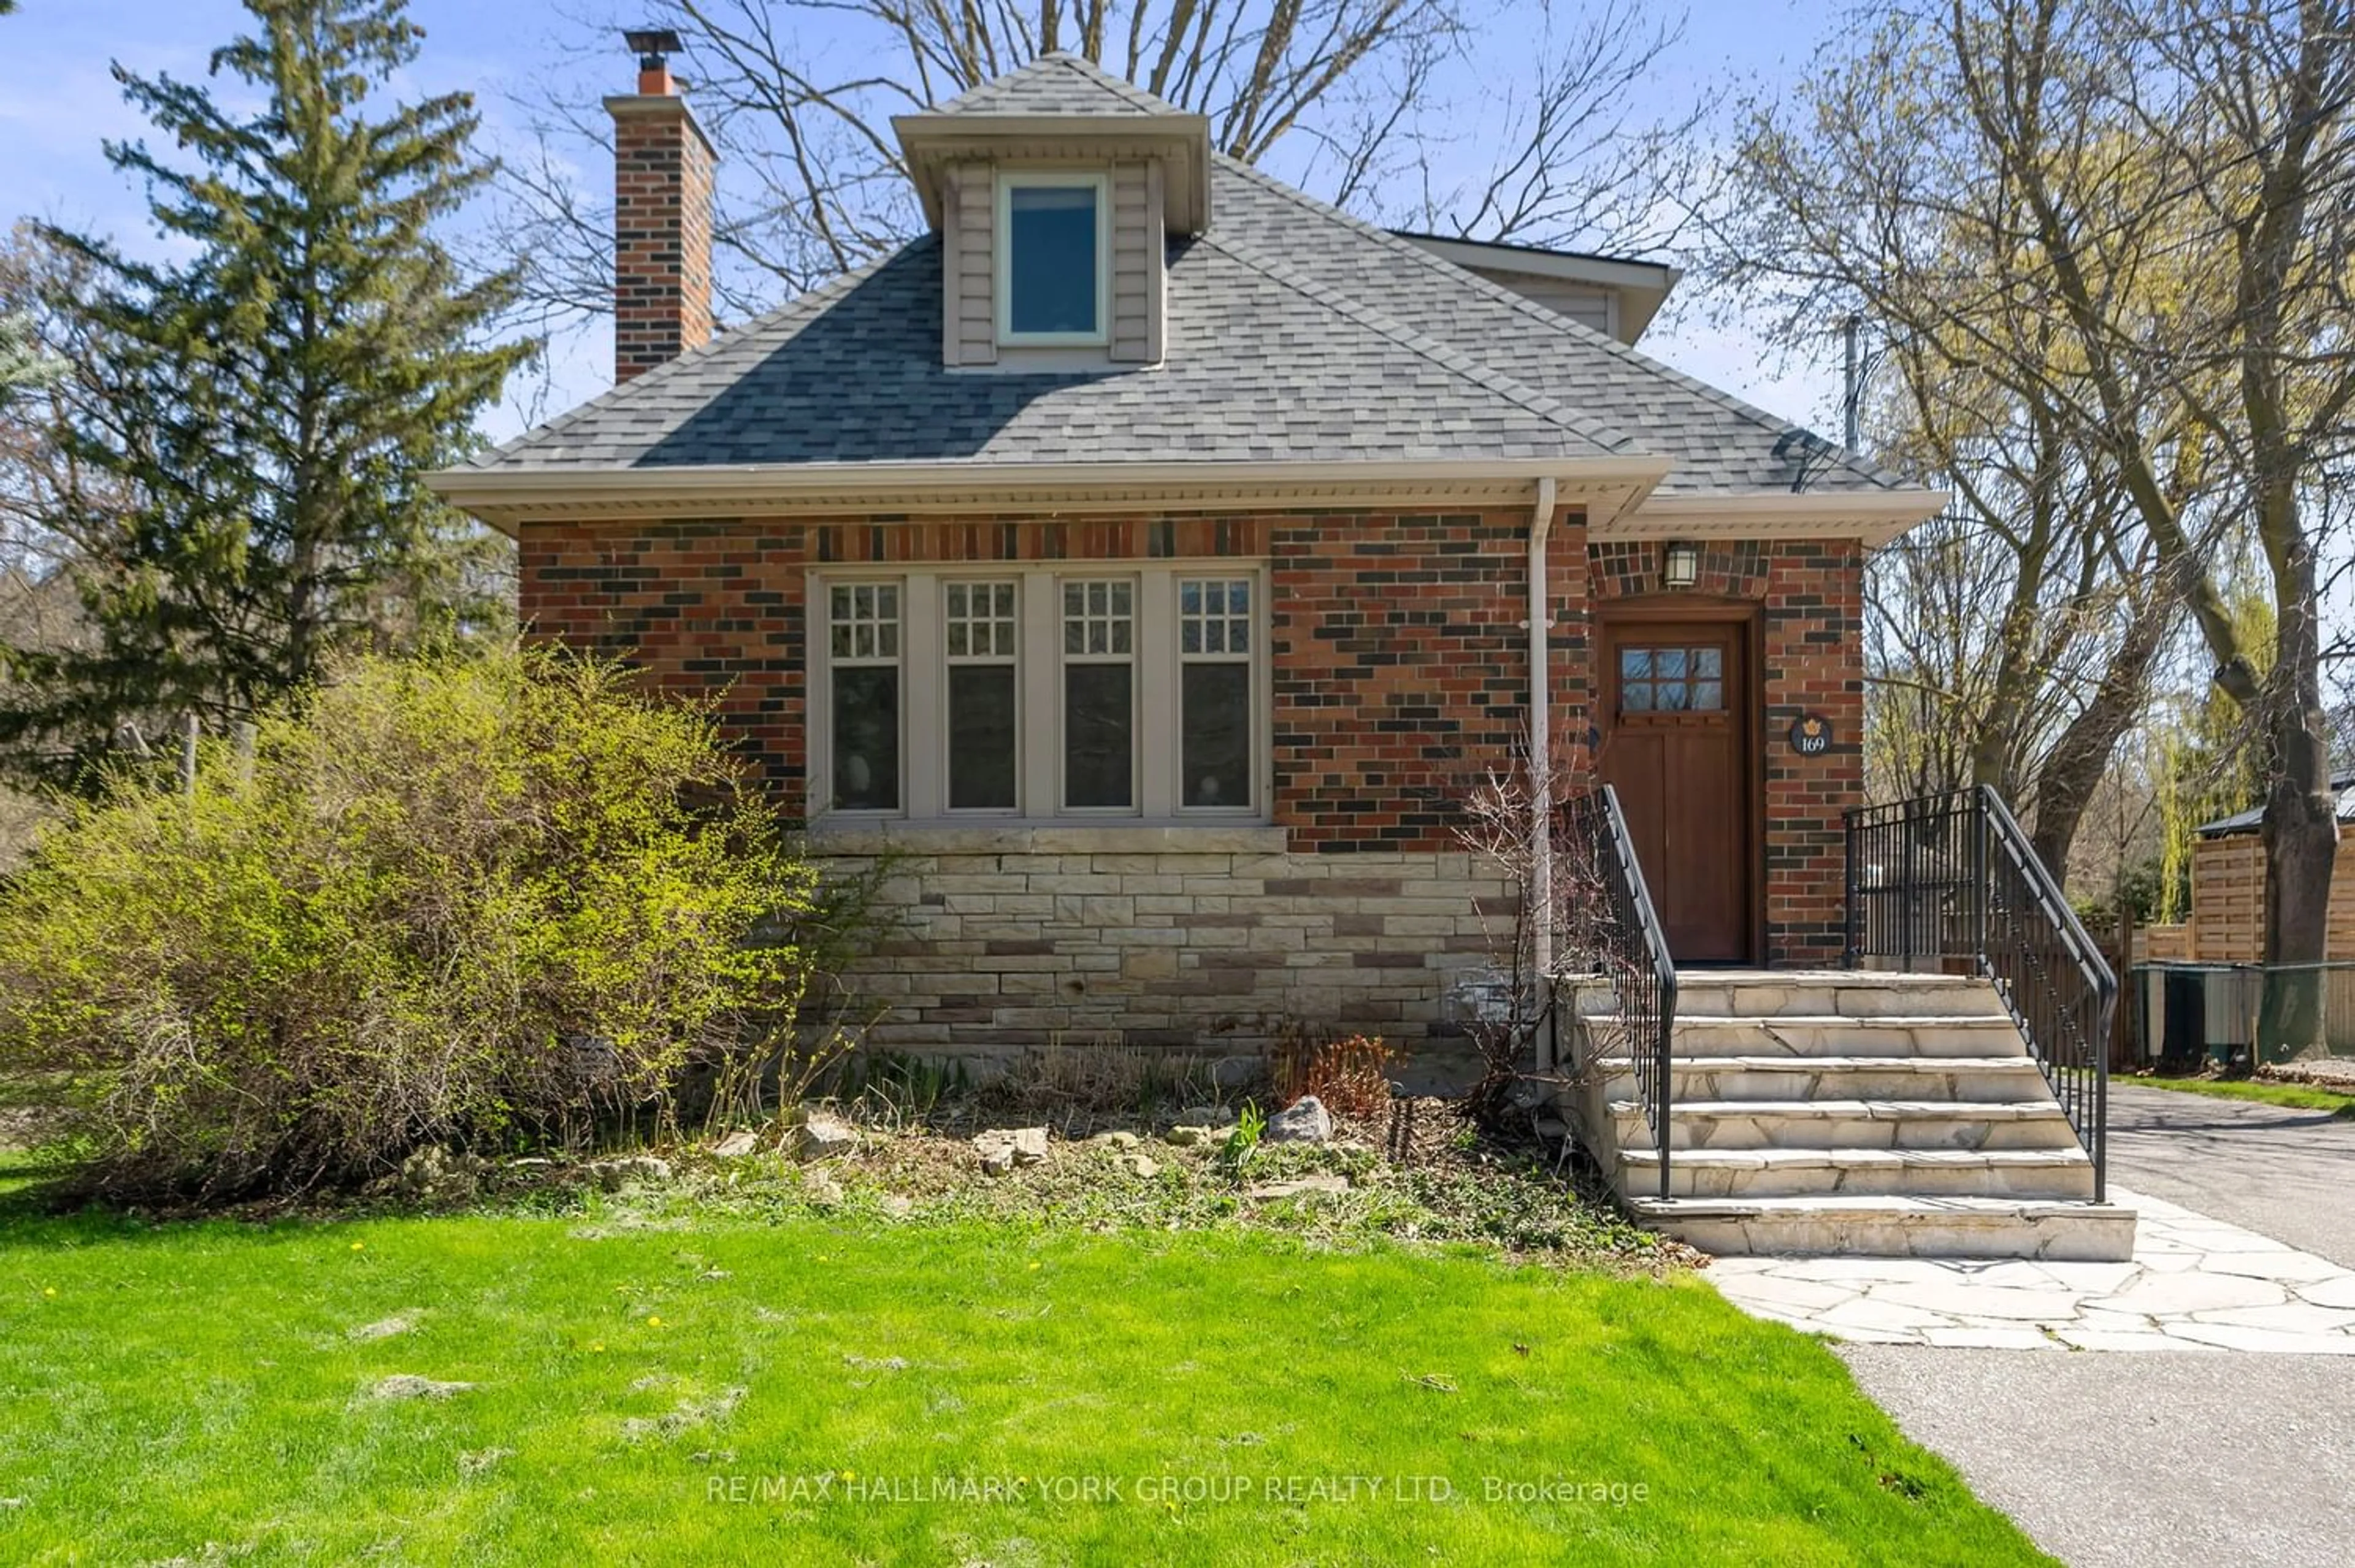 Home with brick exterior material for 169 Clarence St, Vaughan Ontario L4L 1L4